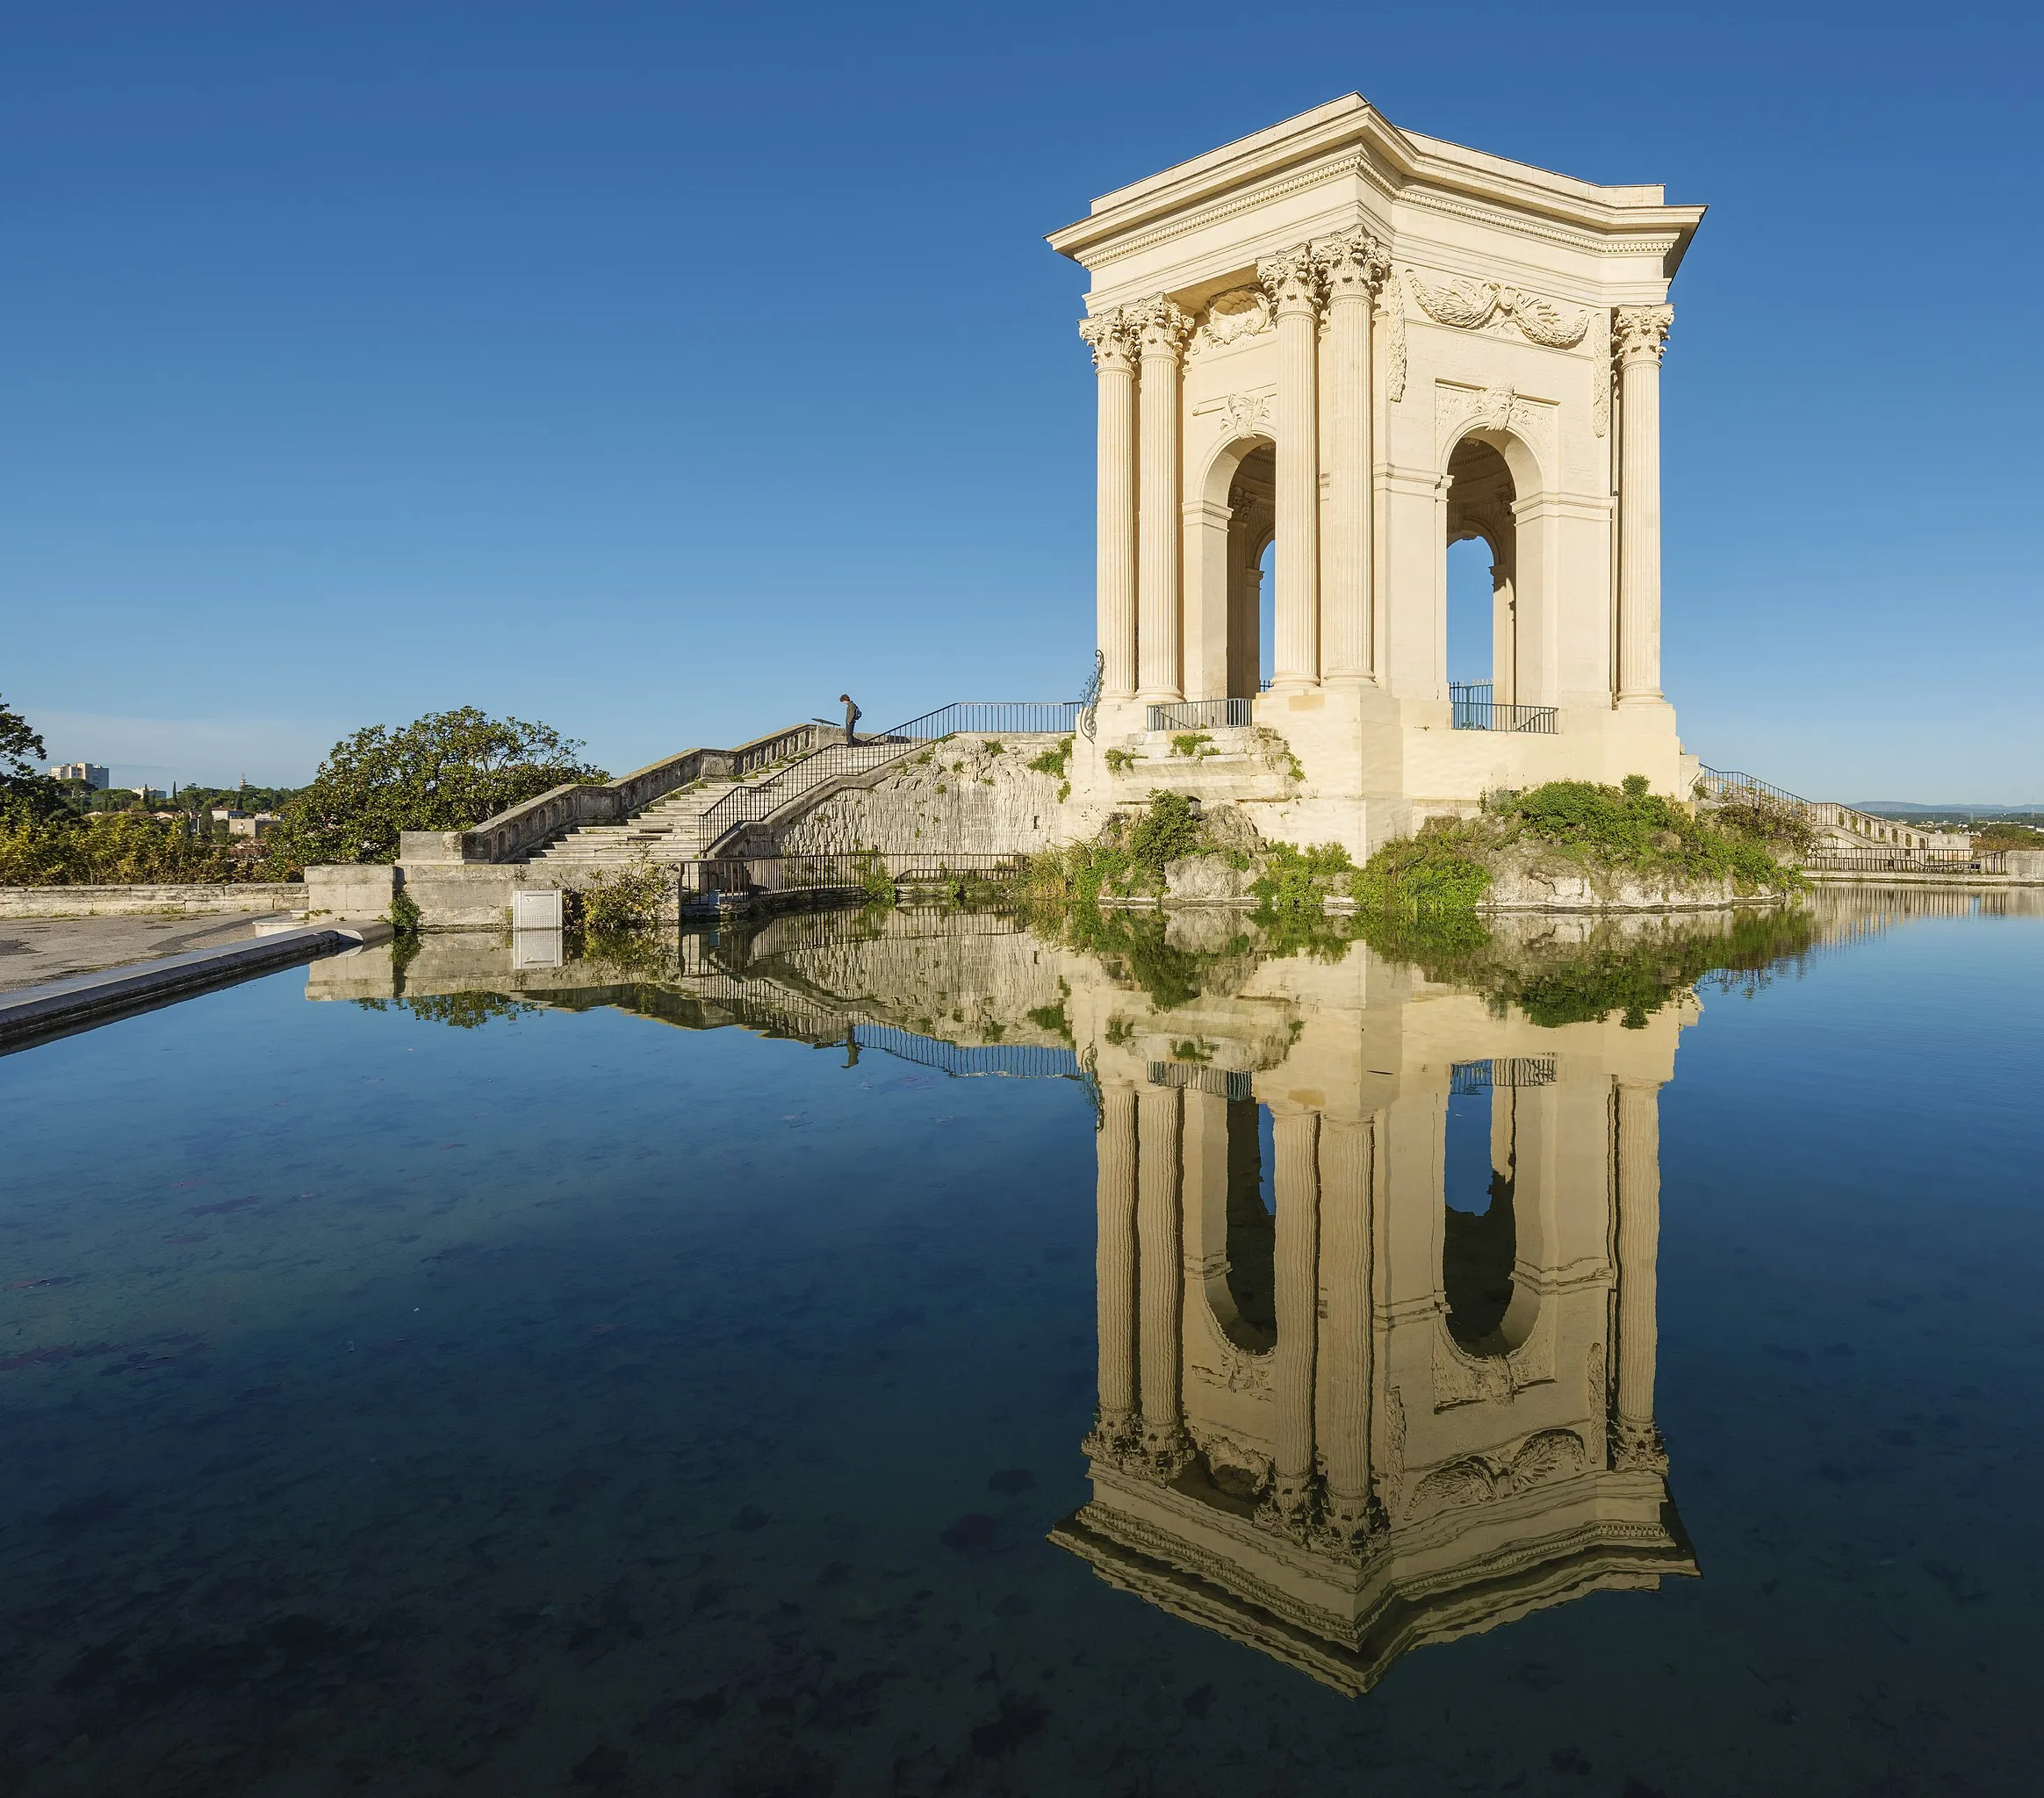 Promenade du Peyrou in France, Europe | Architecture - Rated 3.8